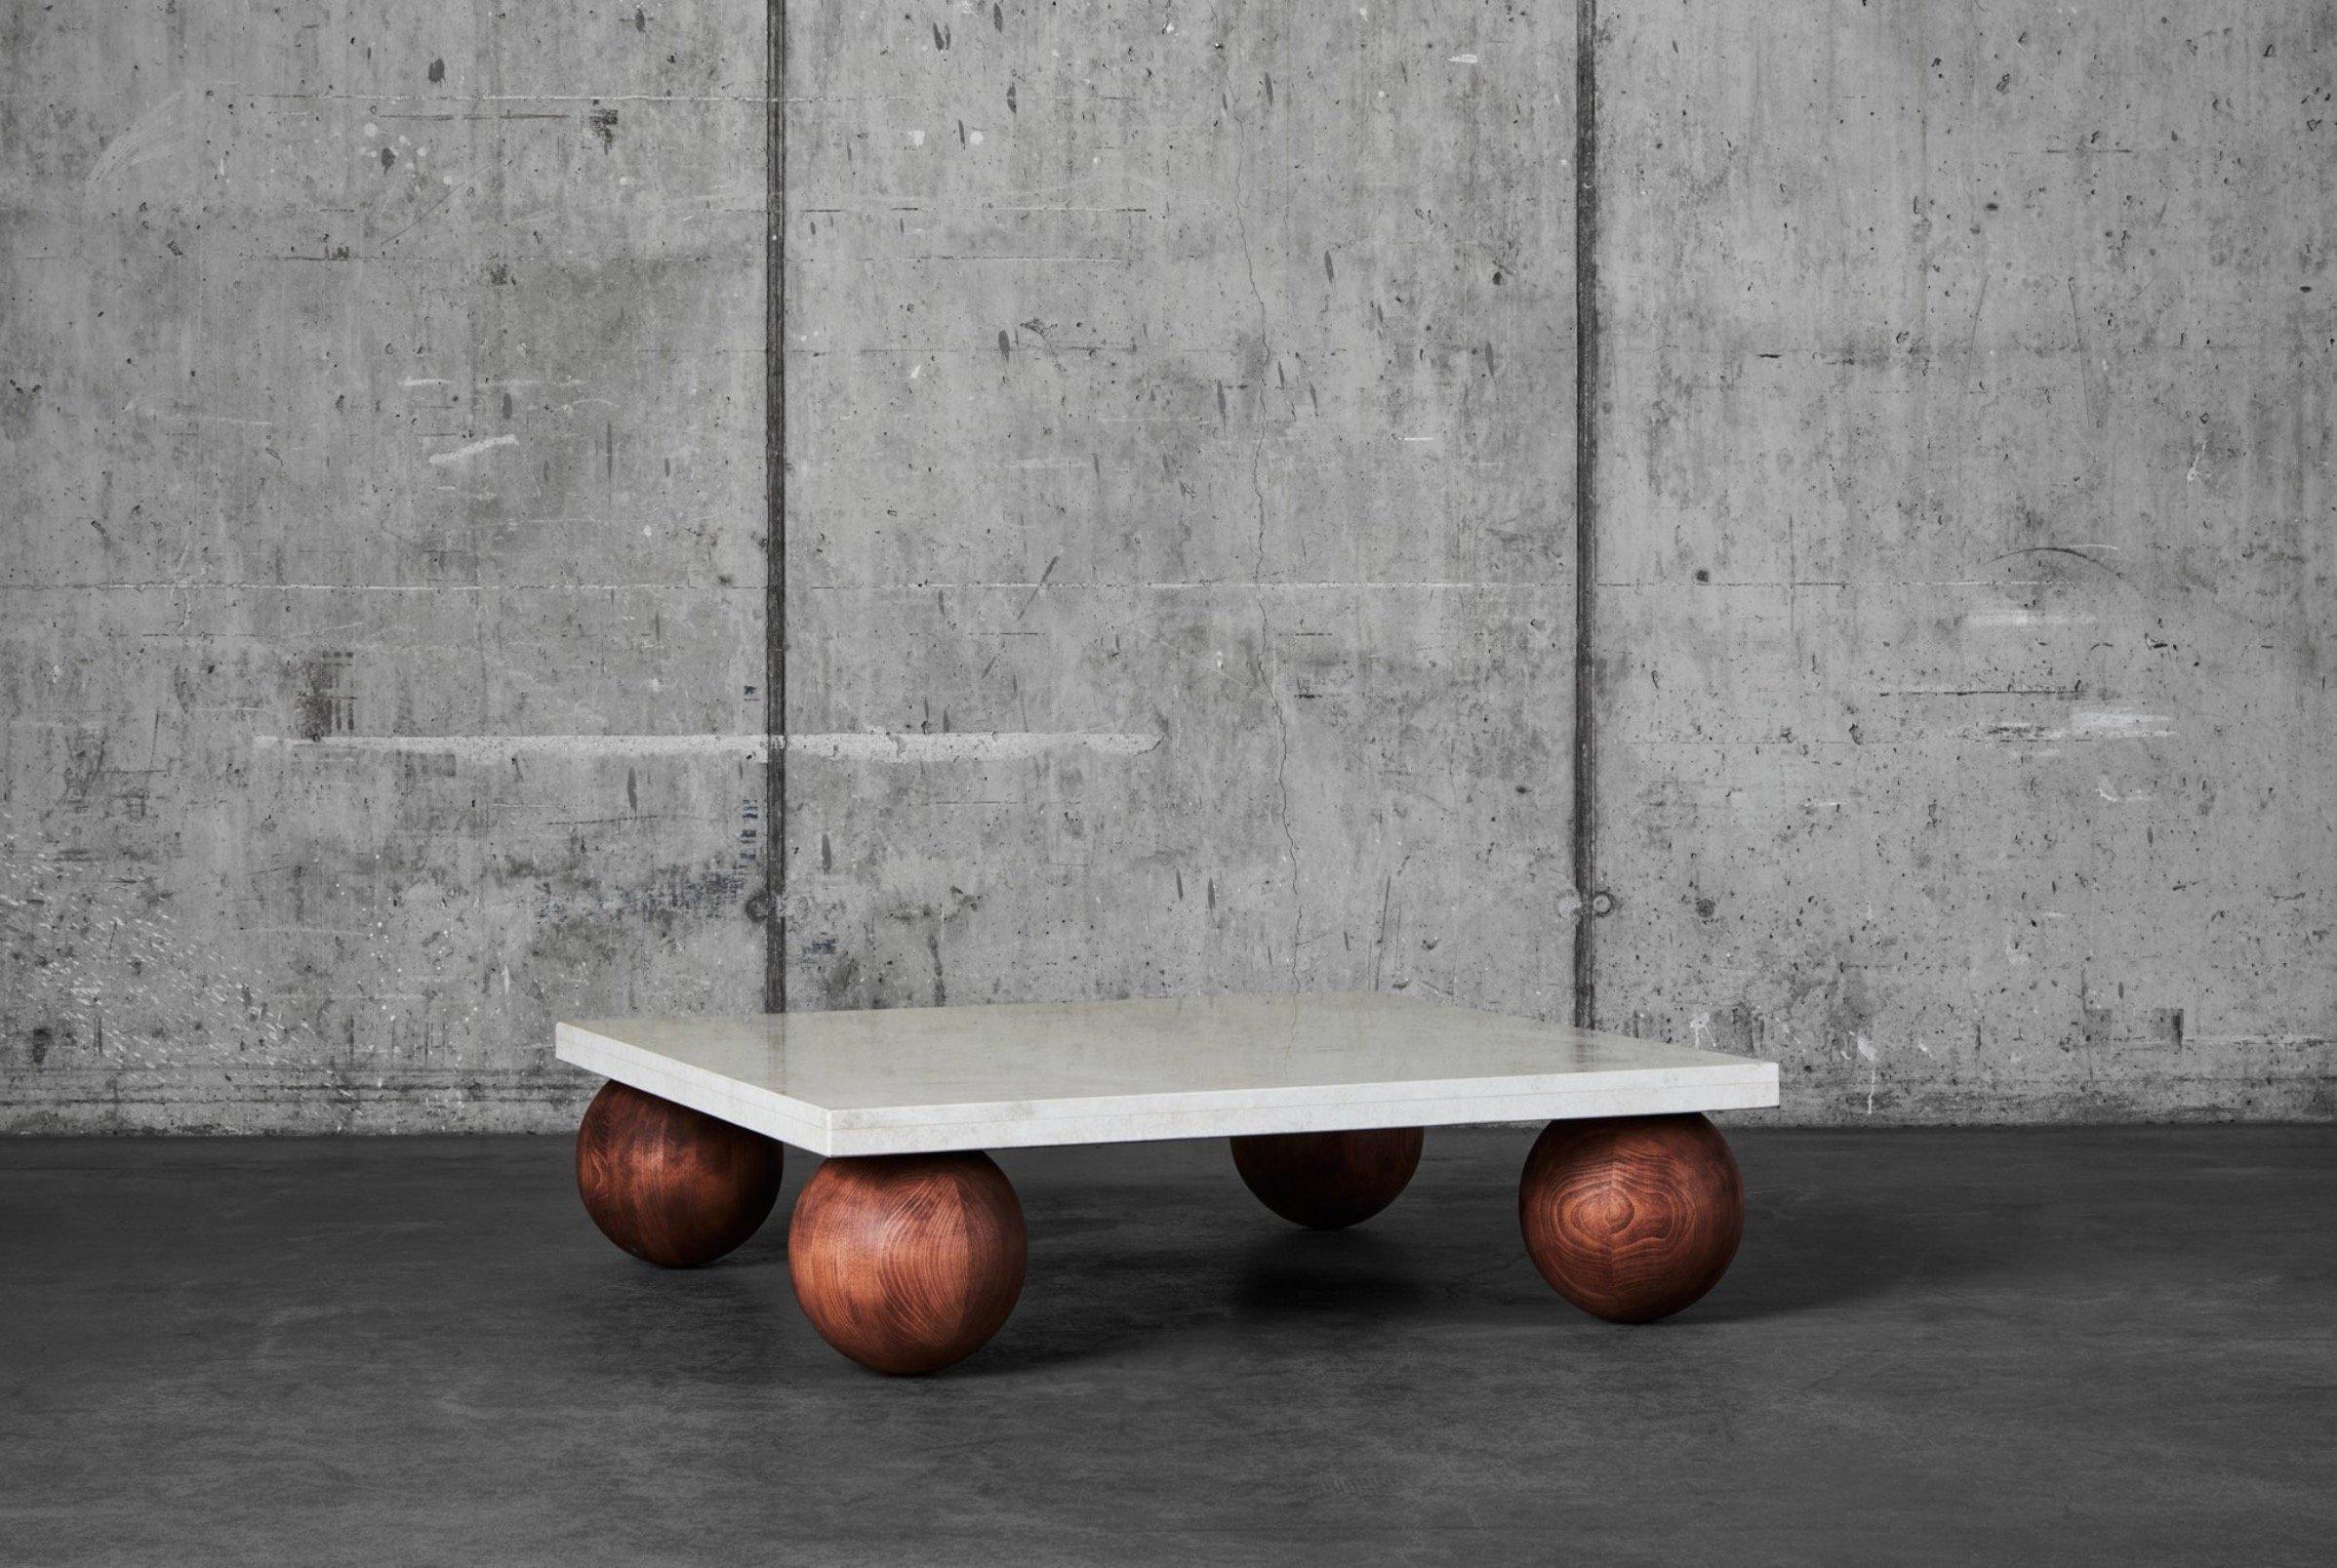 We love this table, the low look, the wooden orbs and the heavy stone. The wooden orbs are made out of solid beech wood that has been stained and oiled, the stone is a granit called Vraca with a nice warm beige tone.
Measurements: 120 x 120 x 30 cm